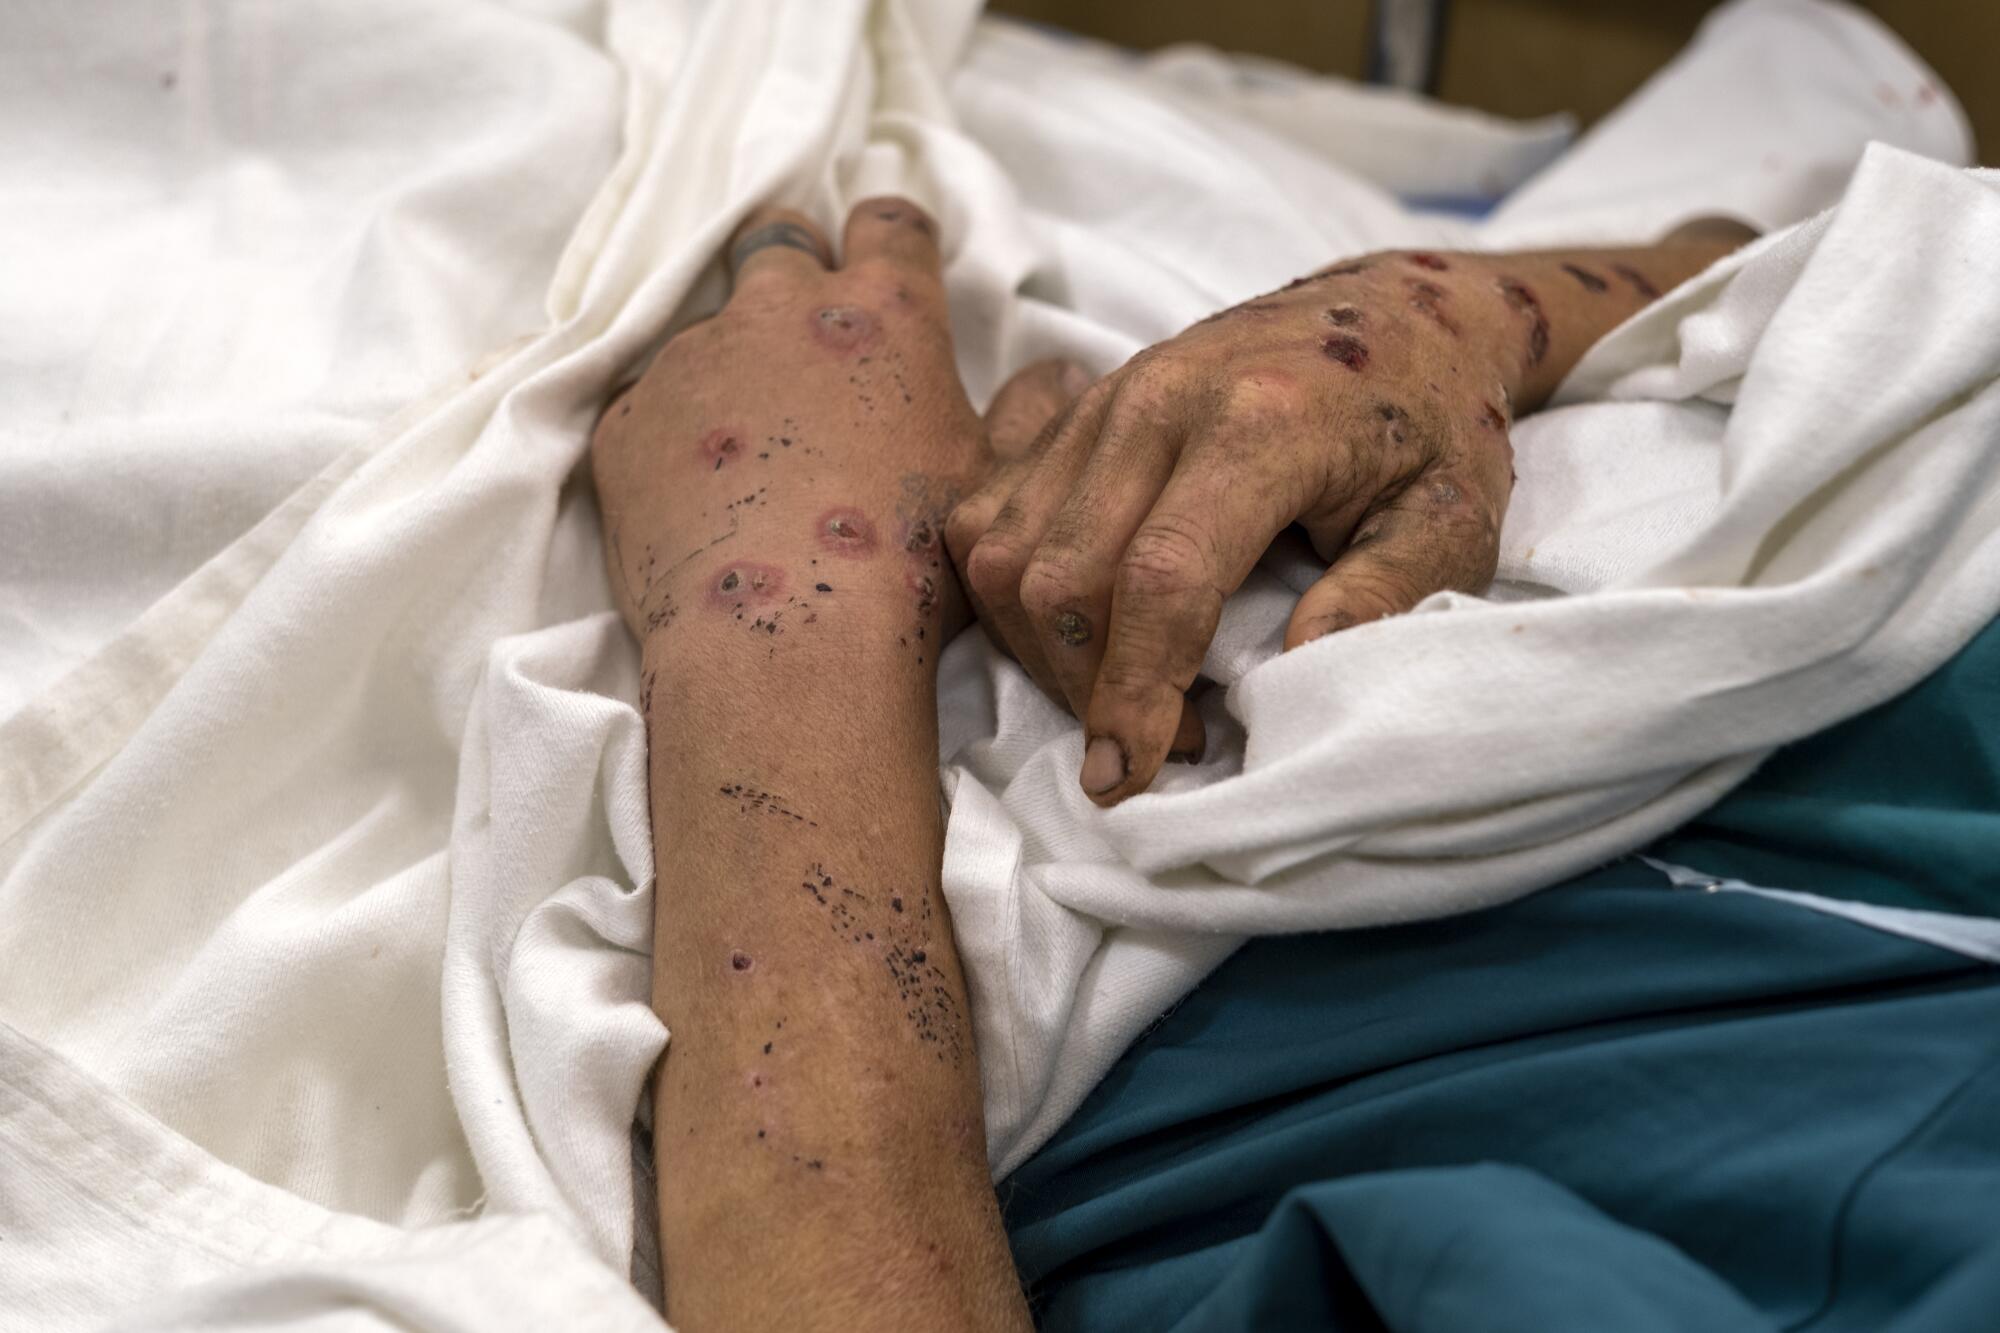 A hospital patient's hands are covered in sores.